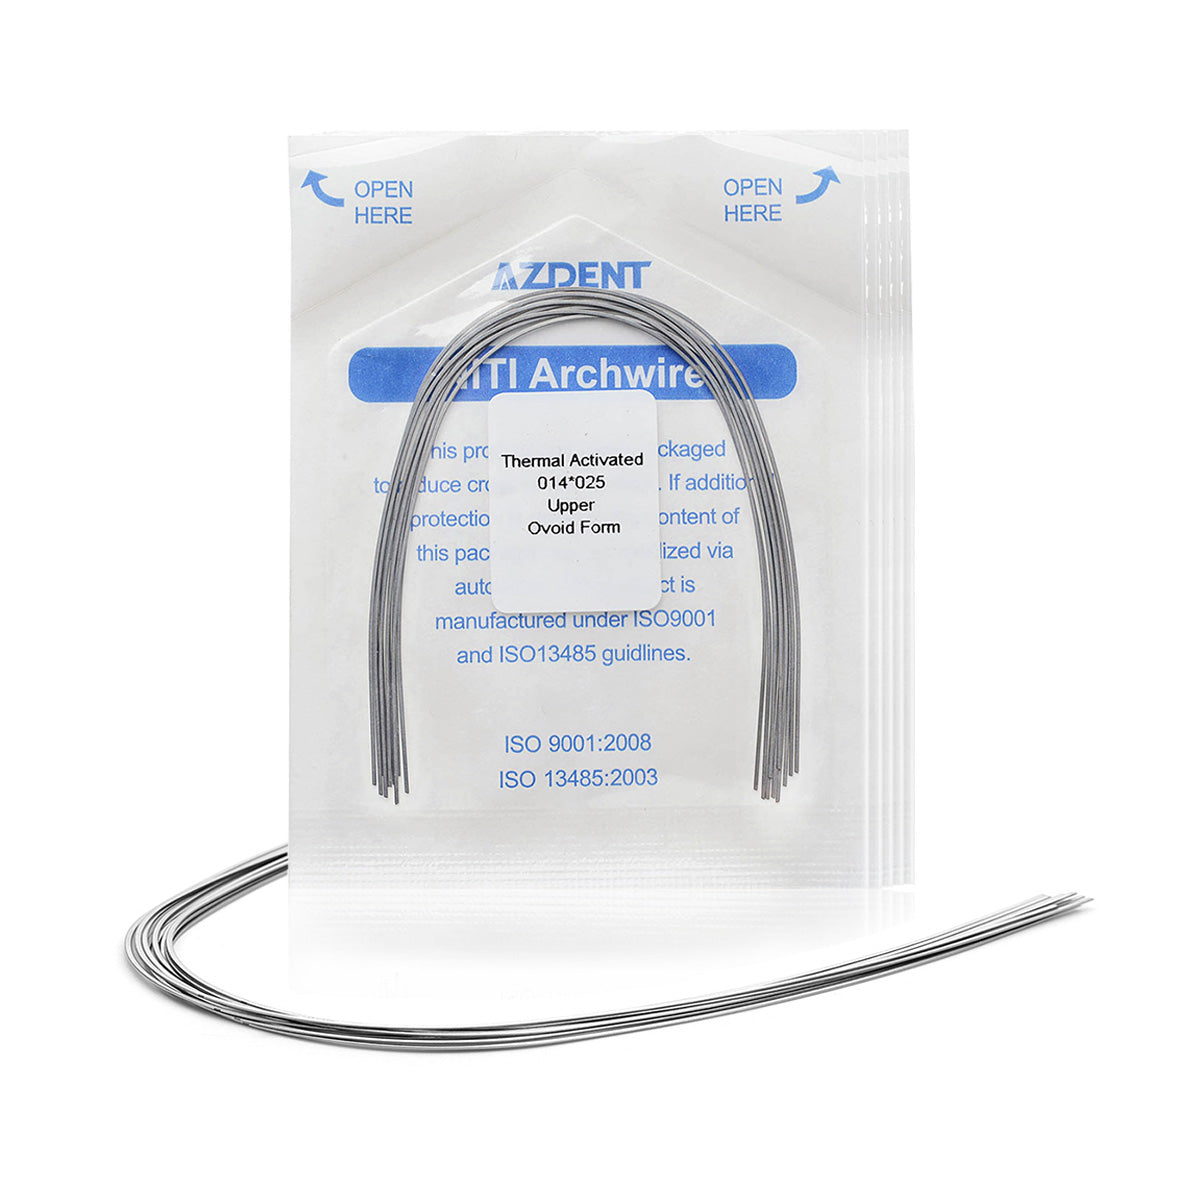 5 Packs Archwire NiTi Thermal Active Ovoid Rectangular 0.14-0.21 x 0.16-0.25 Upper/Lower 10pcs/Pack - pairaydental.com